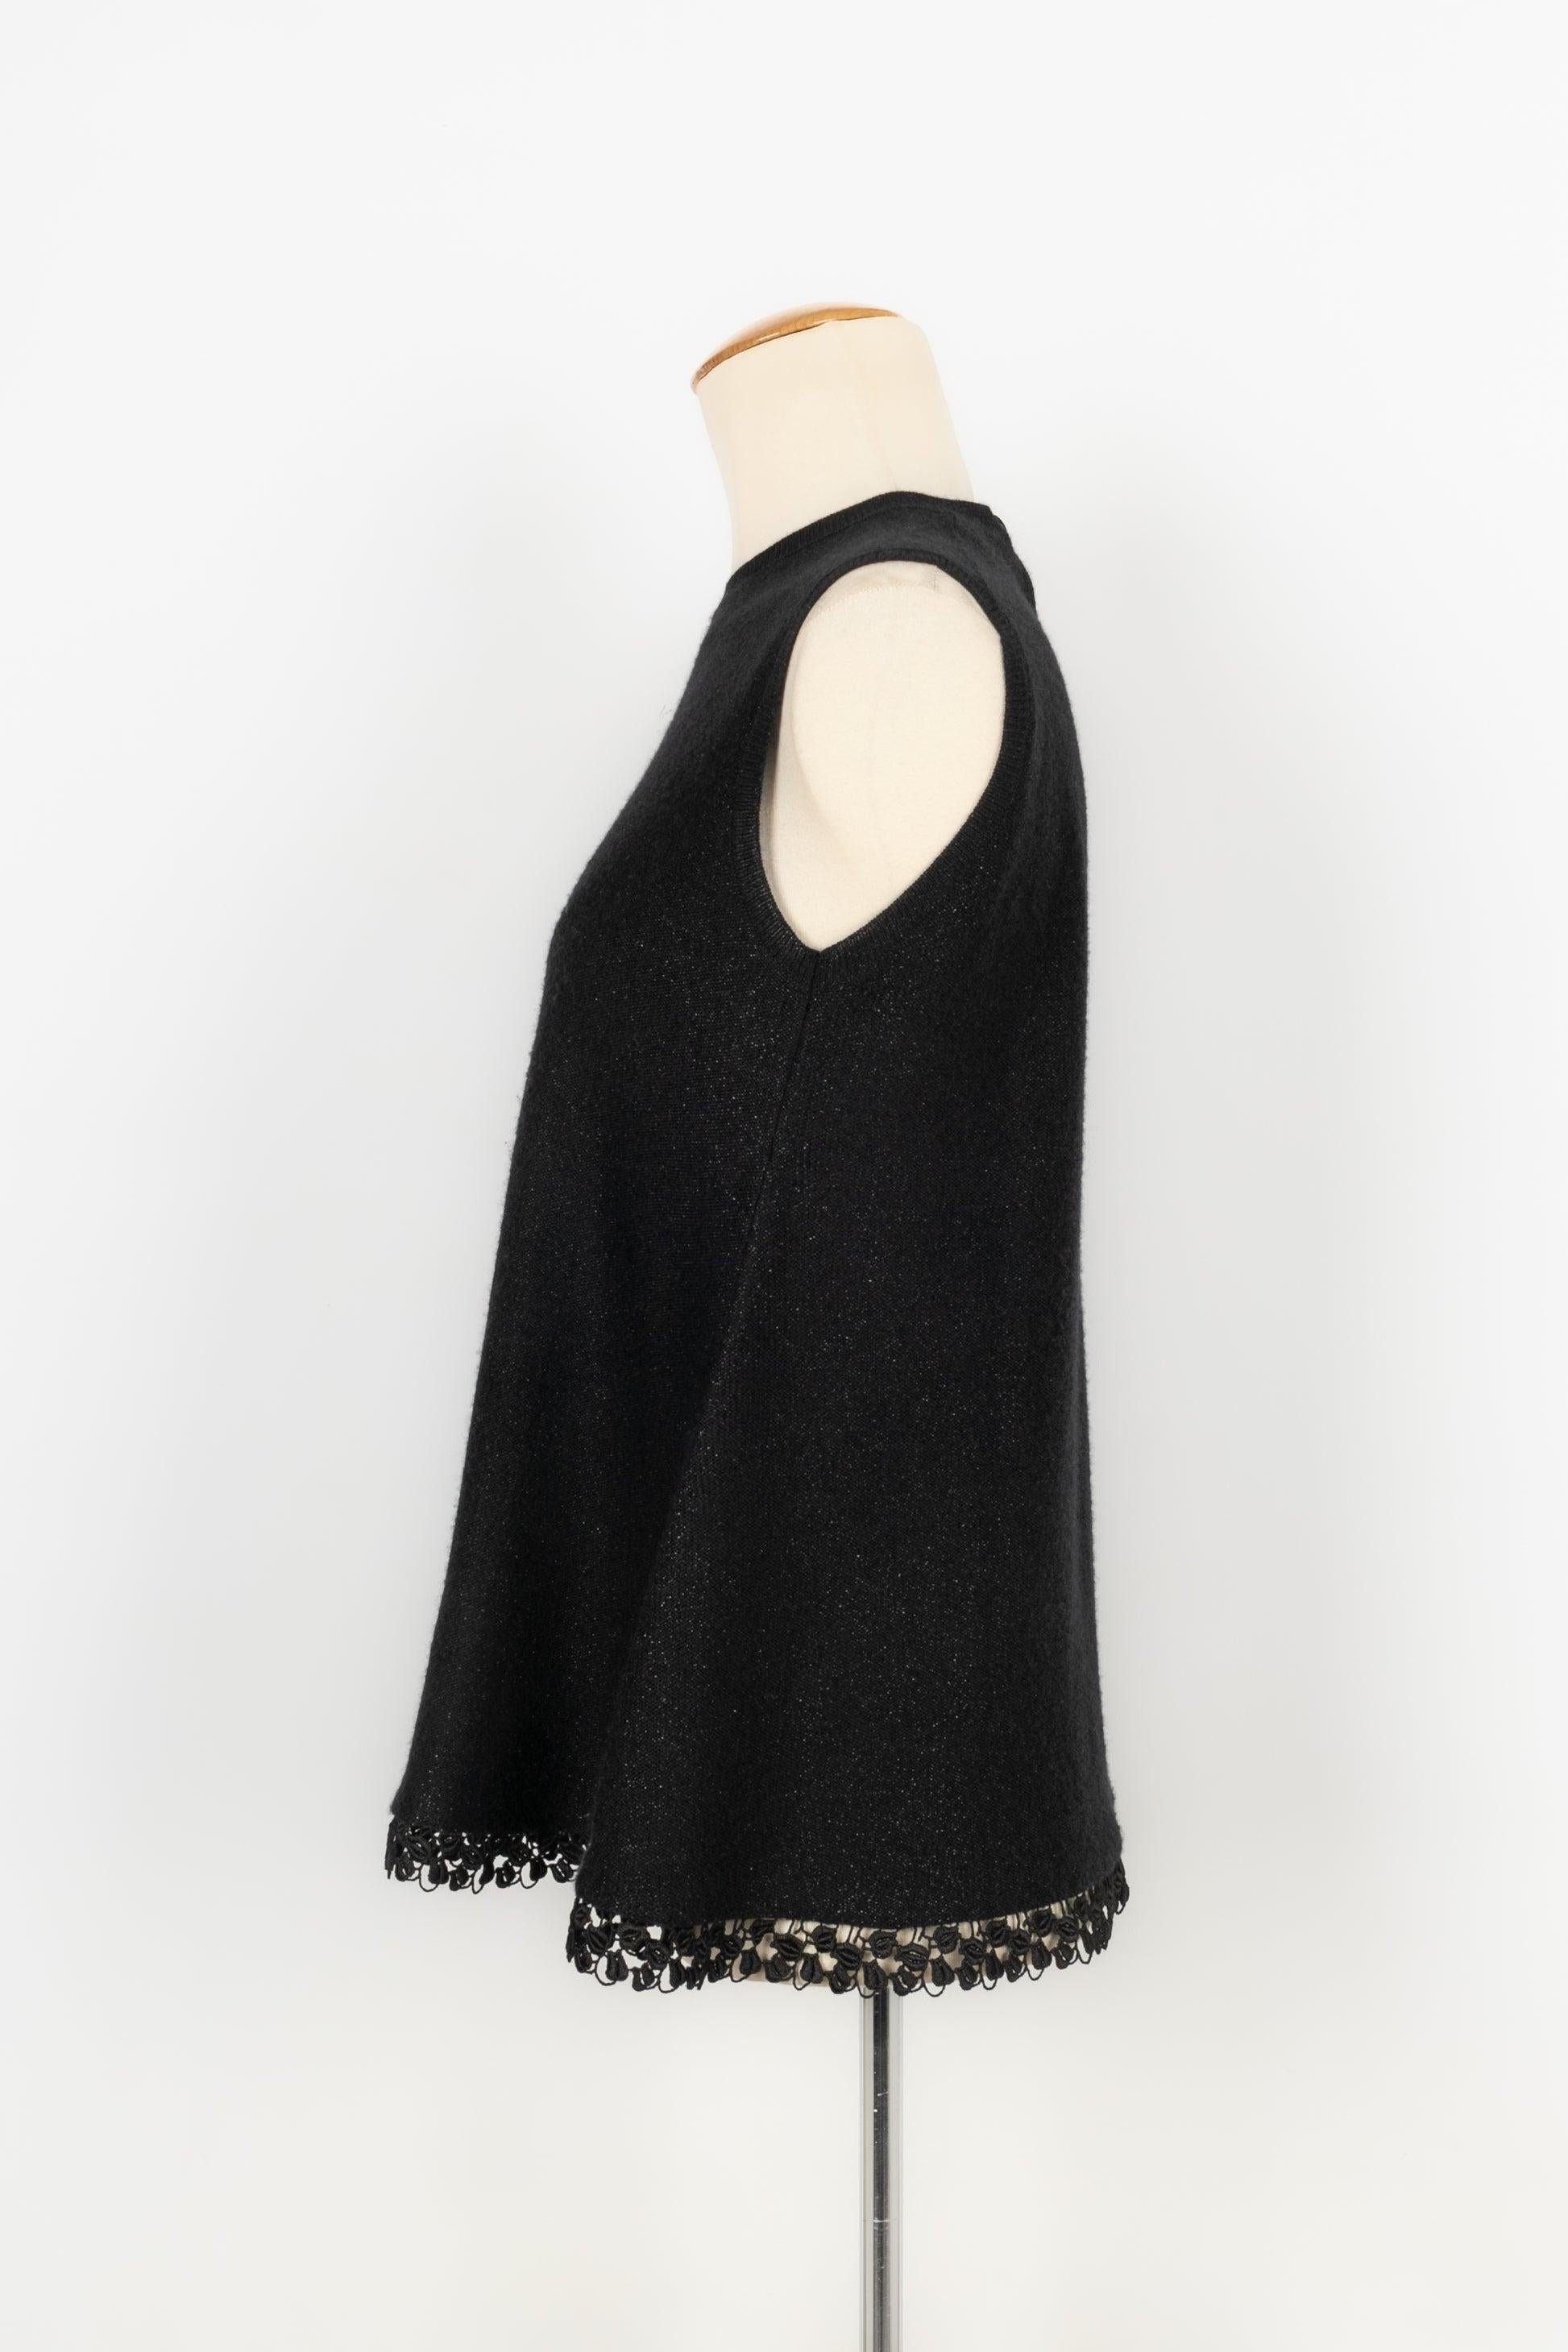 Dior - (Made in Italy) Black silk and cashmere sequinned top. Size 40FR. Spring-summer 2003 Ready-to-Wear Collection under the direction of John Galliano.

Additional information:
Condition: Very good condition
Dimensions: Chest: 45 cm
Length: 60